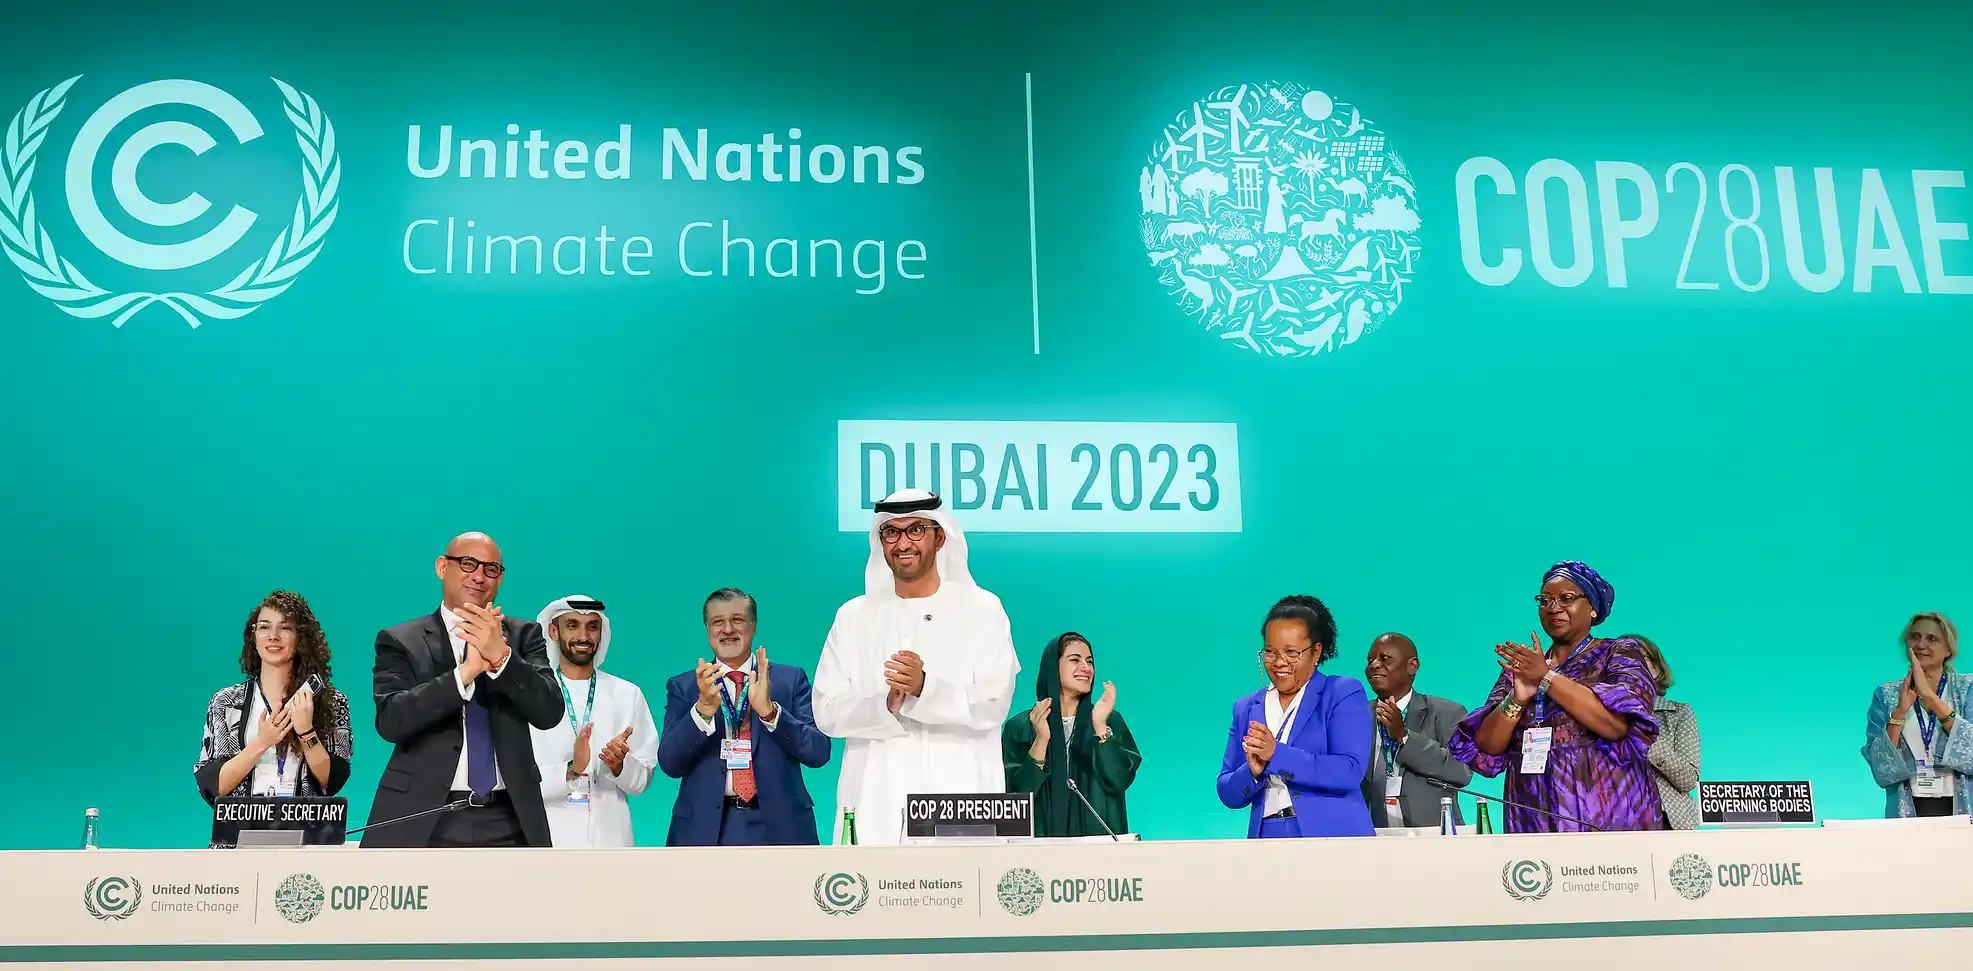 world leaders at the COP29 opening in Dubai